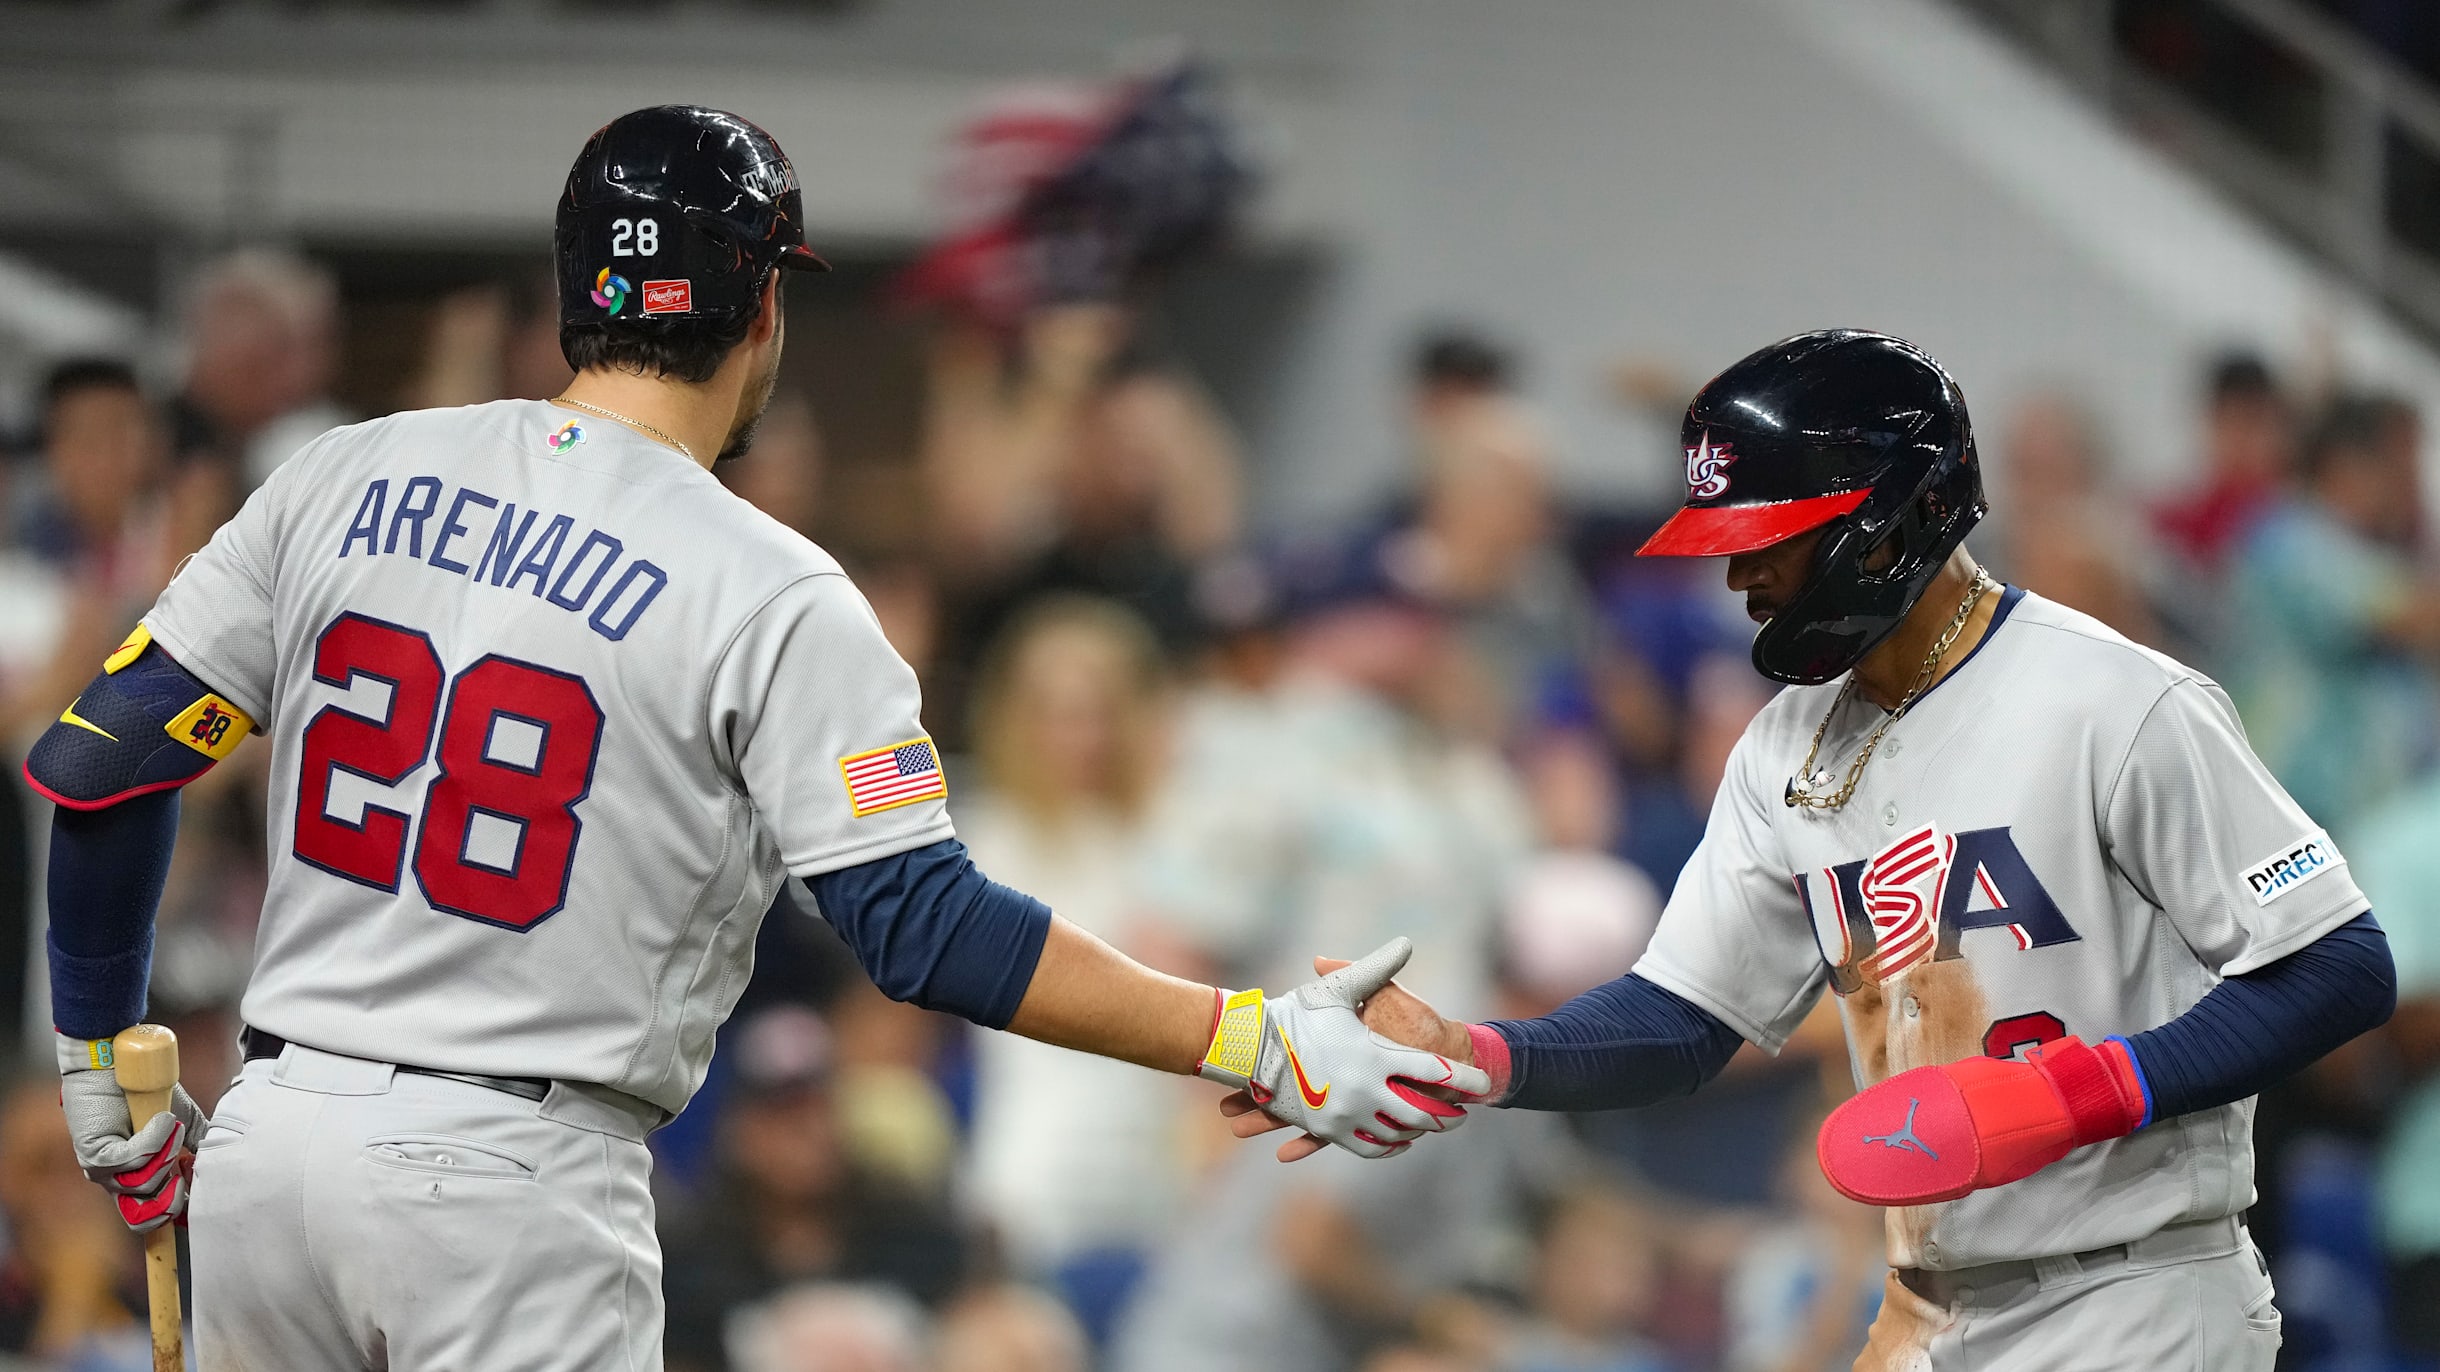 Team USA's exhibition recap & World Baseball Classic preview against Great  Britain